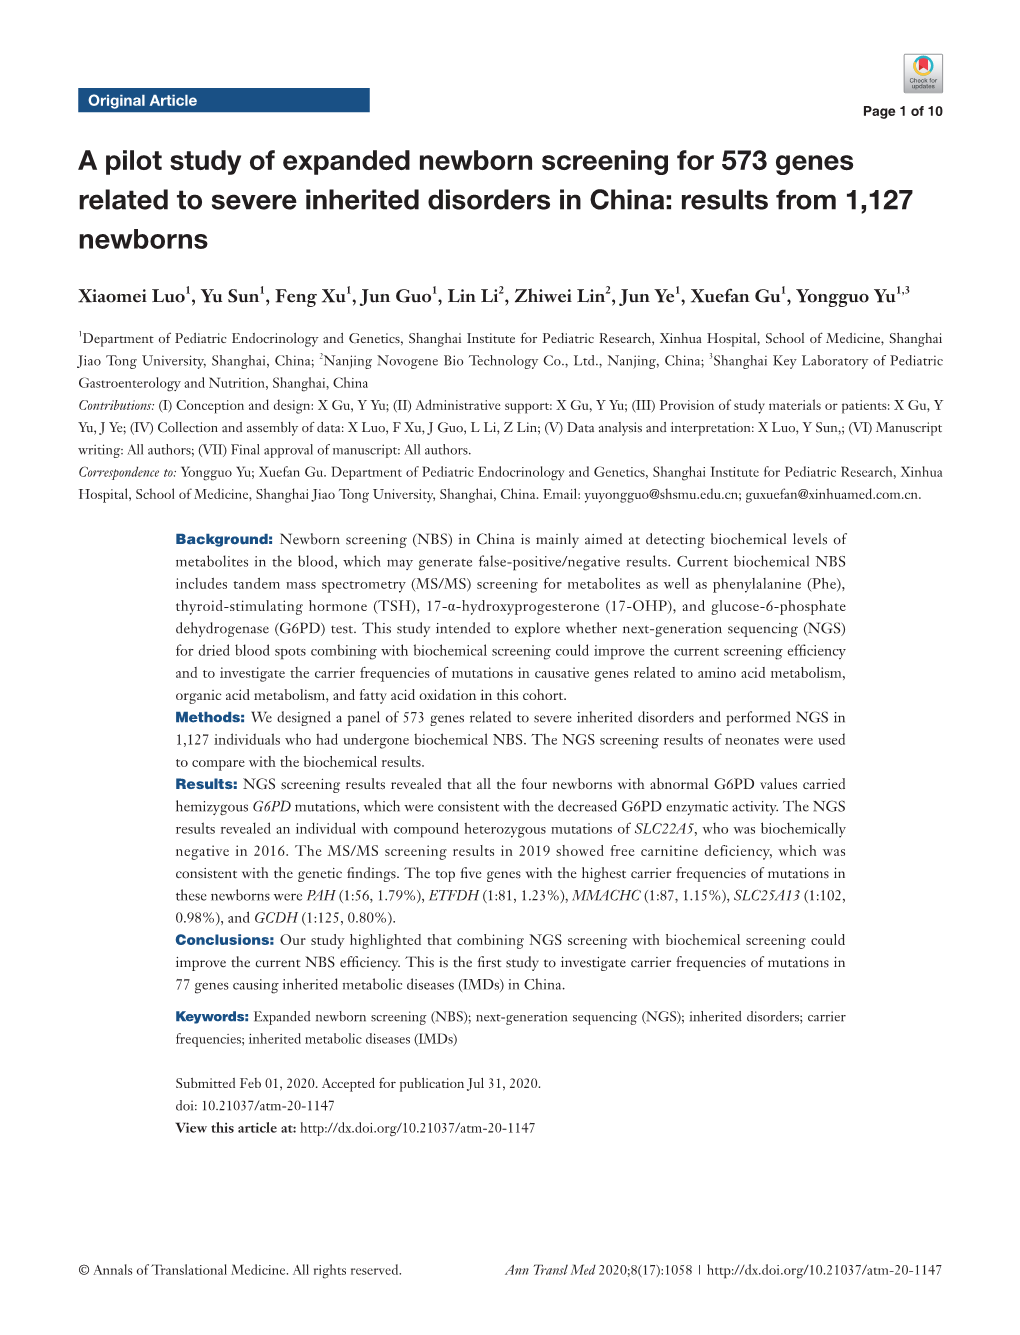 A Pilot Study of Expanded Newborn Screening for 573 Genes Related to Severe Inherited Disorders in China: Results from 1,127 Newborns